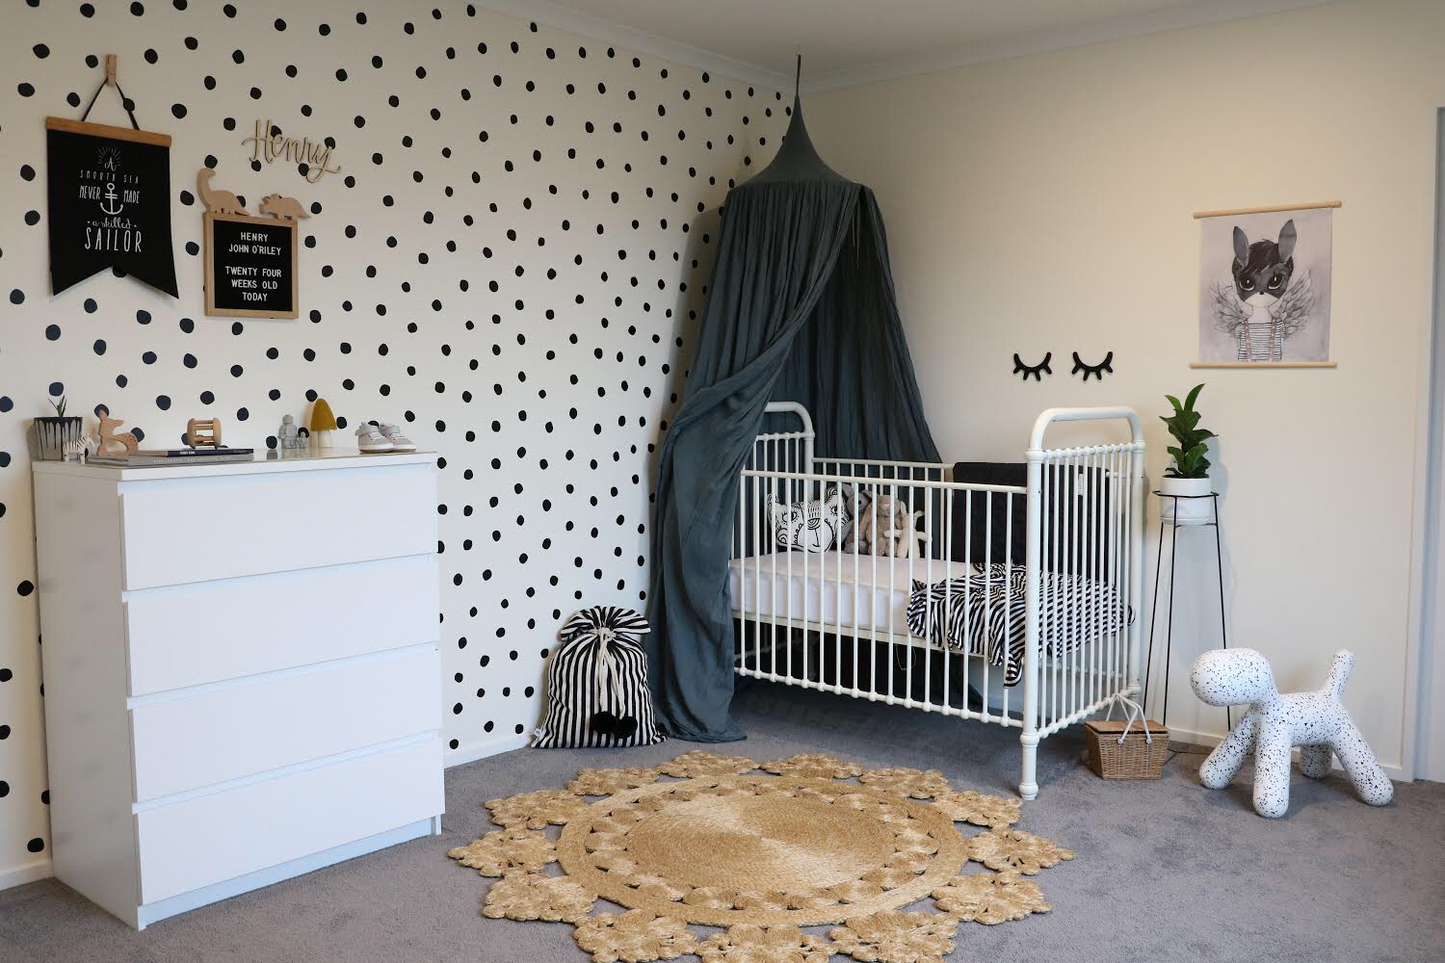 Hand painted Polka Dot Wall decals